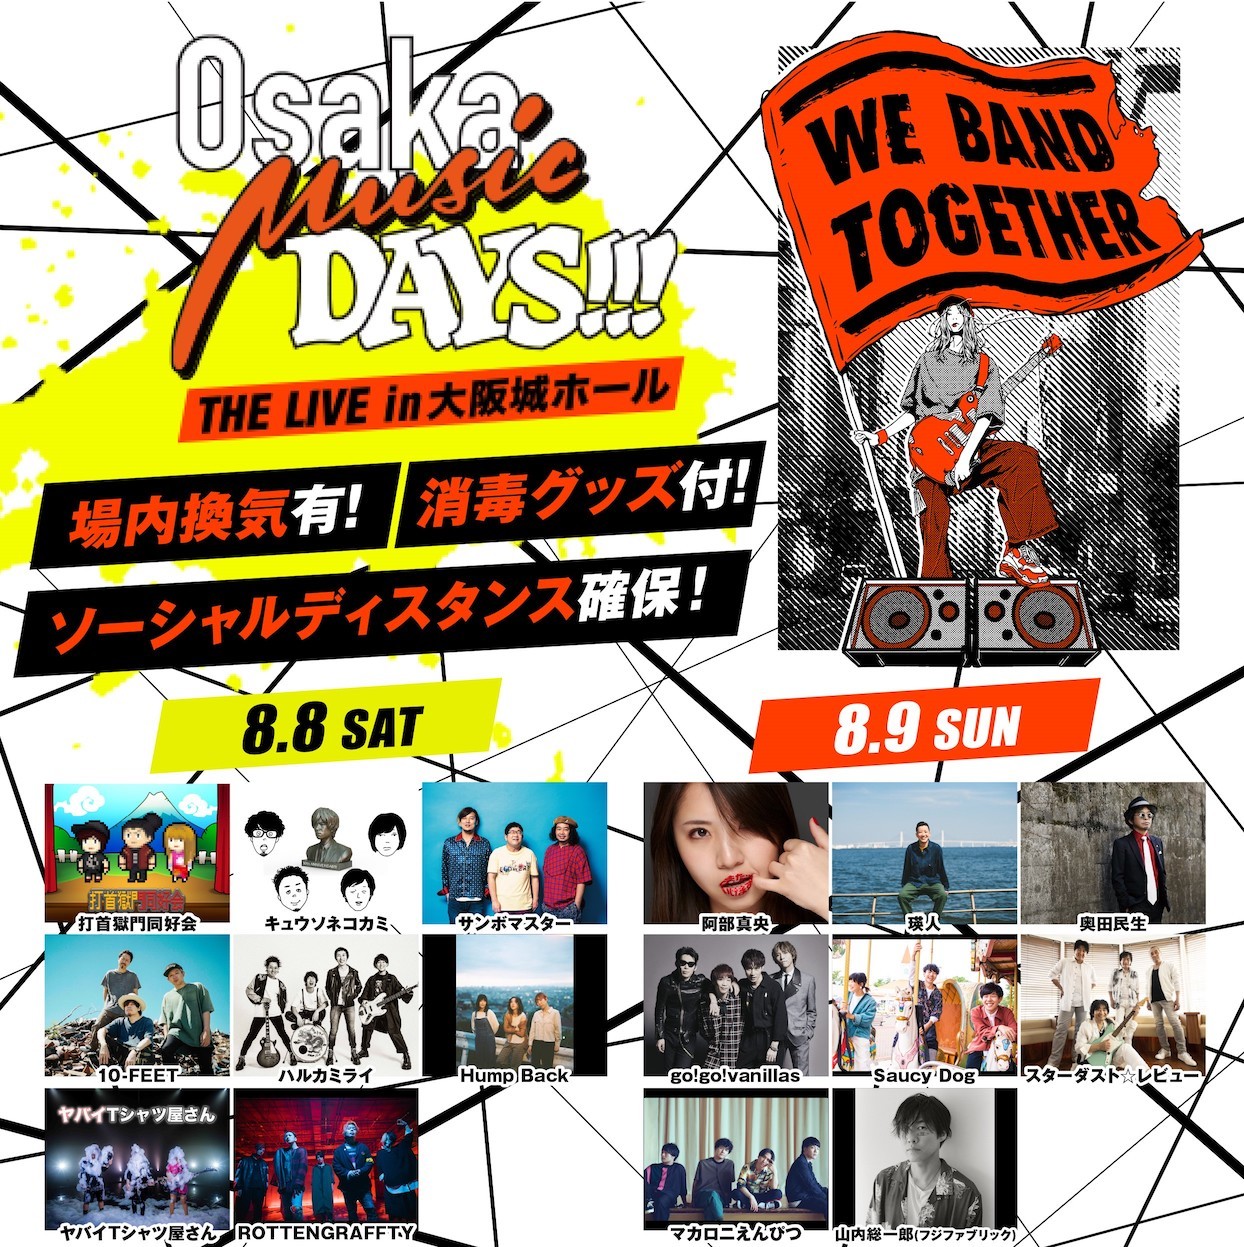 『Osaka Music DAYS!!! THE LIVE in 大阪城ホール』